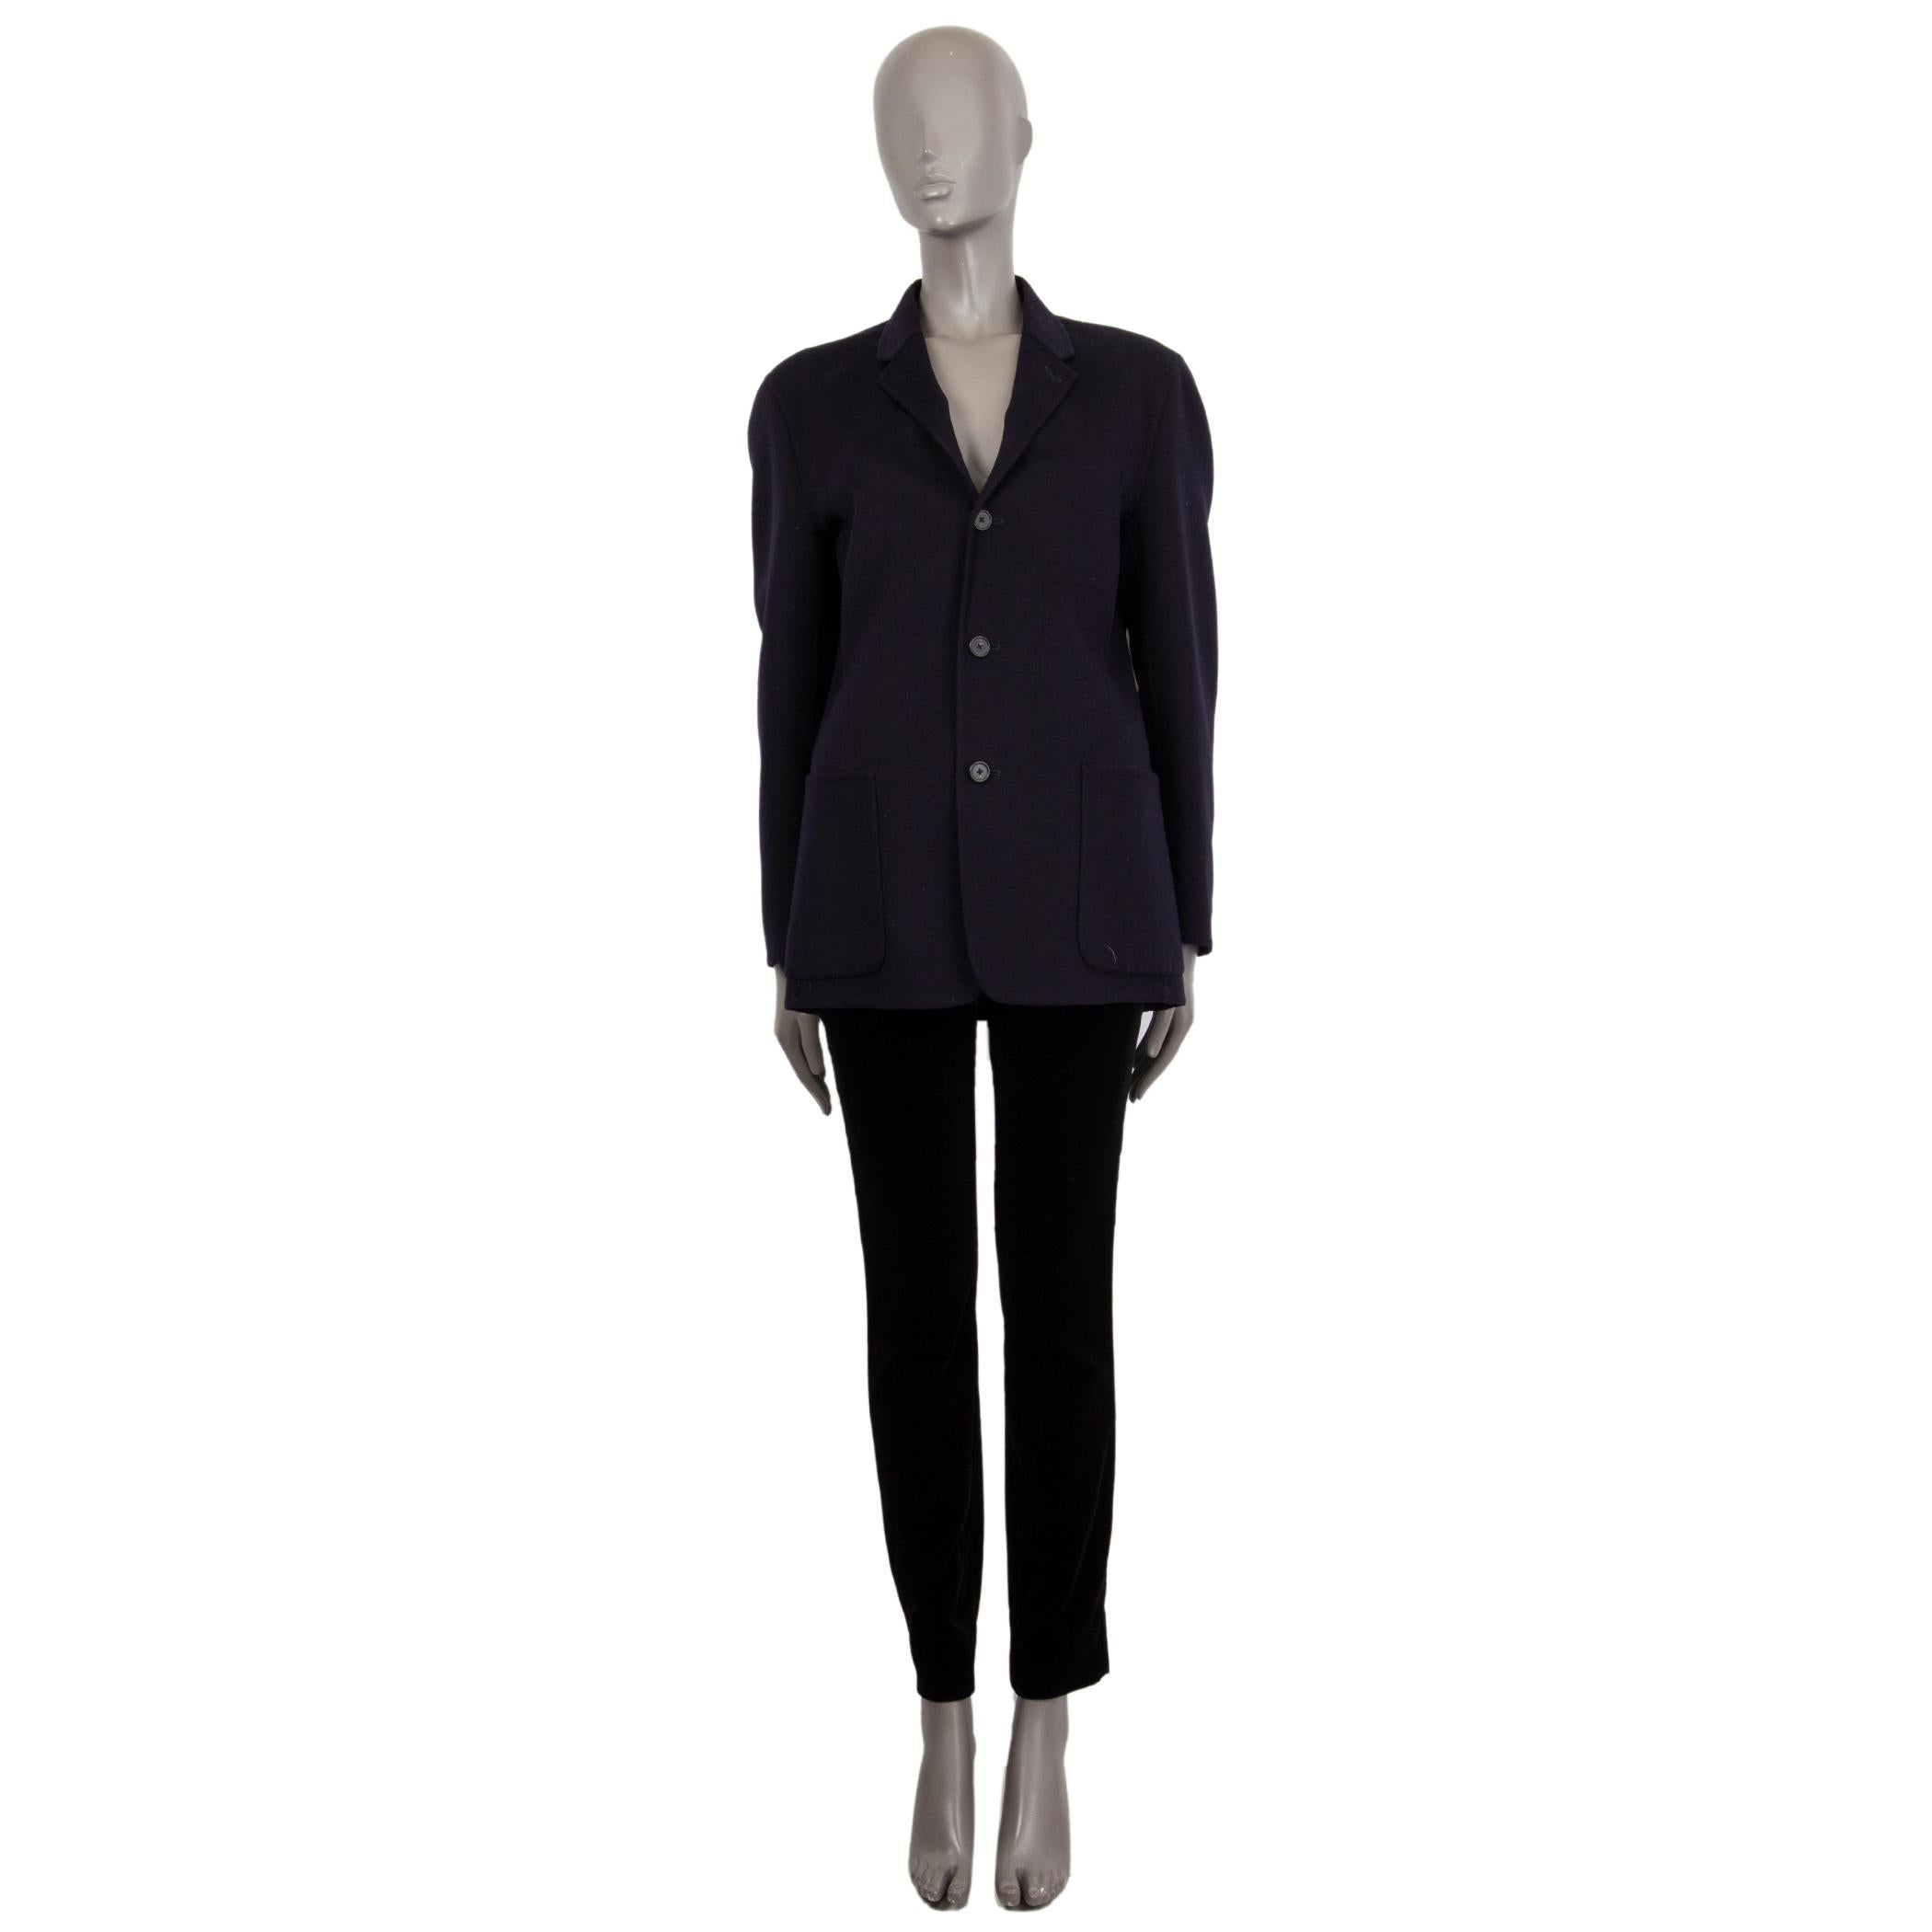 100% authentic Jil Sander thre-button blazer midnight-blue soft double-face wool (90%) and cashmere (10%). Two big front pockets. Partially lined in midnight-blue cupro (100%) with an inside chest pocket. Has been worn and is in excellent